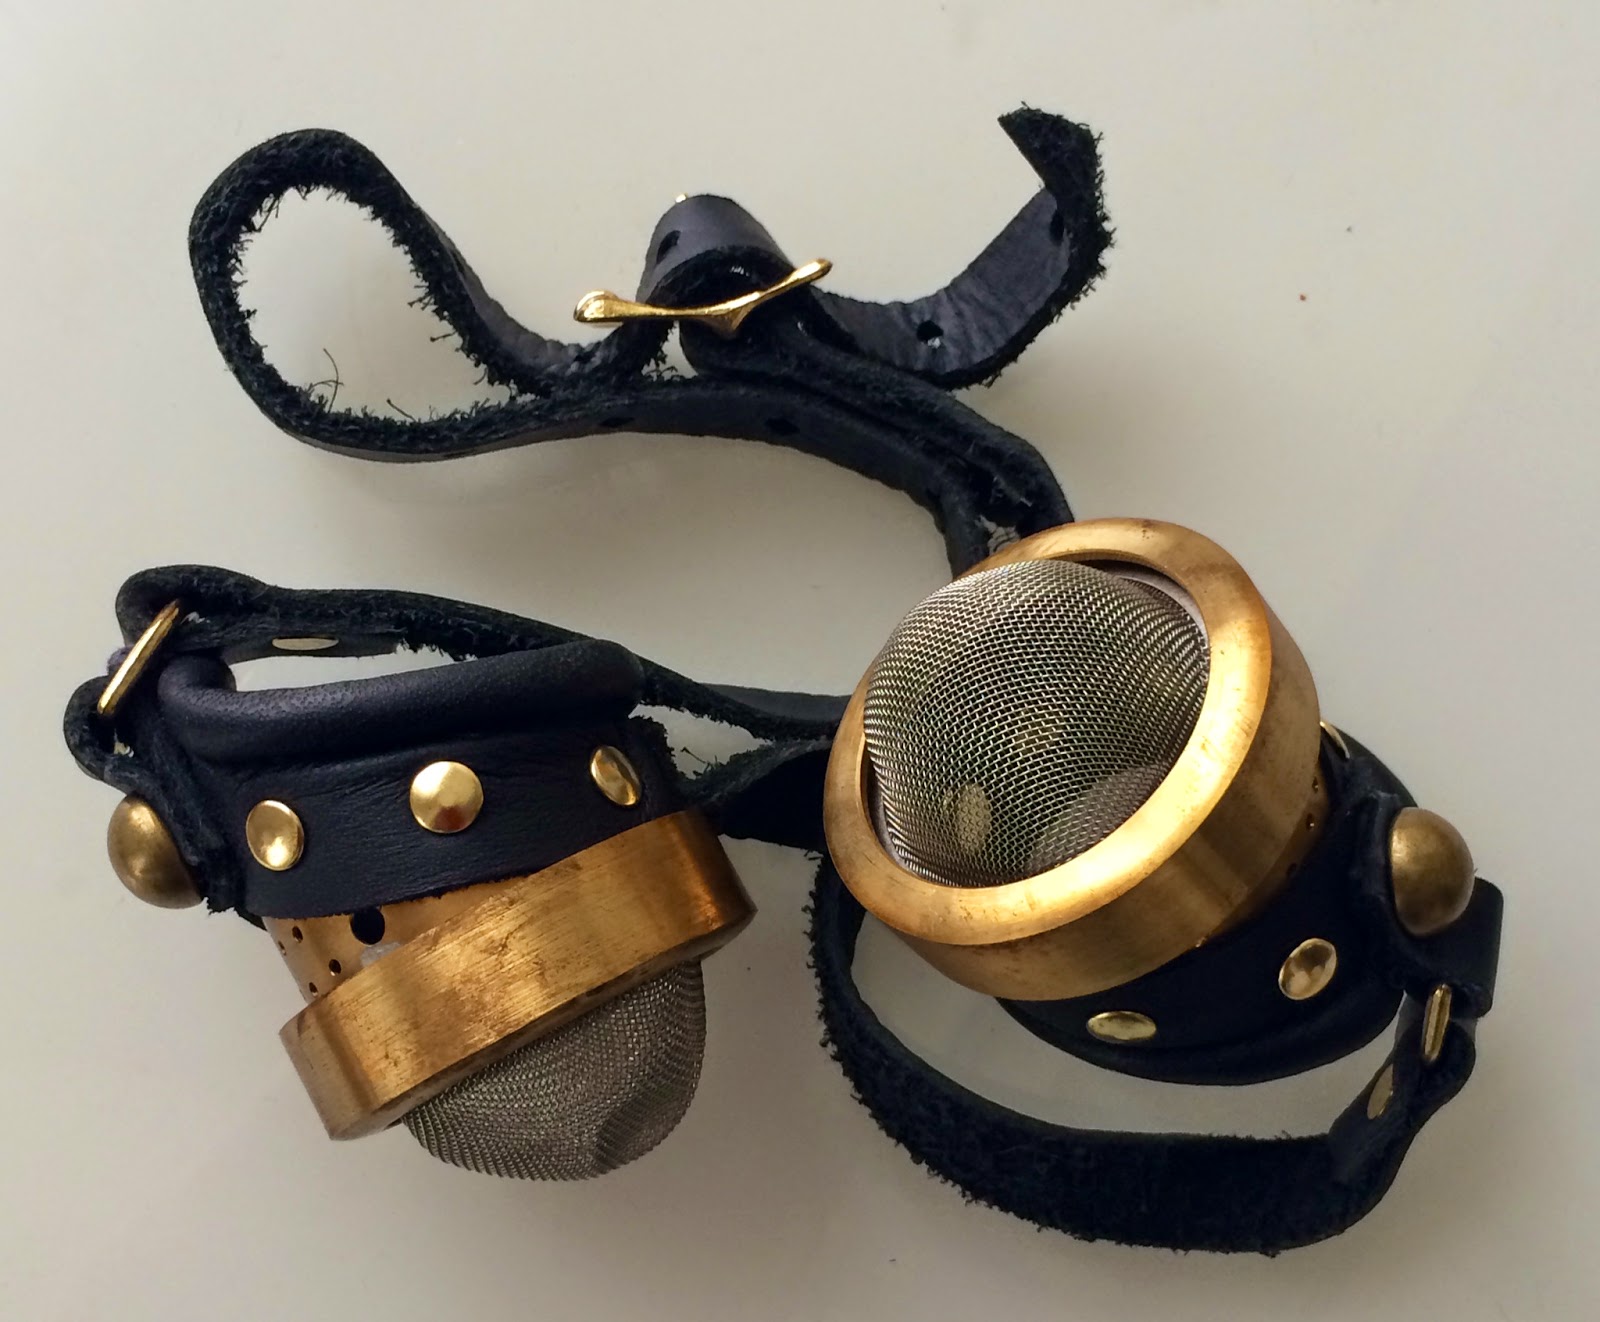 Steampunk Accessories DIY & More from Gail Carriger